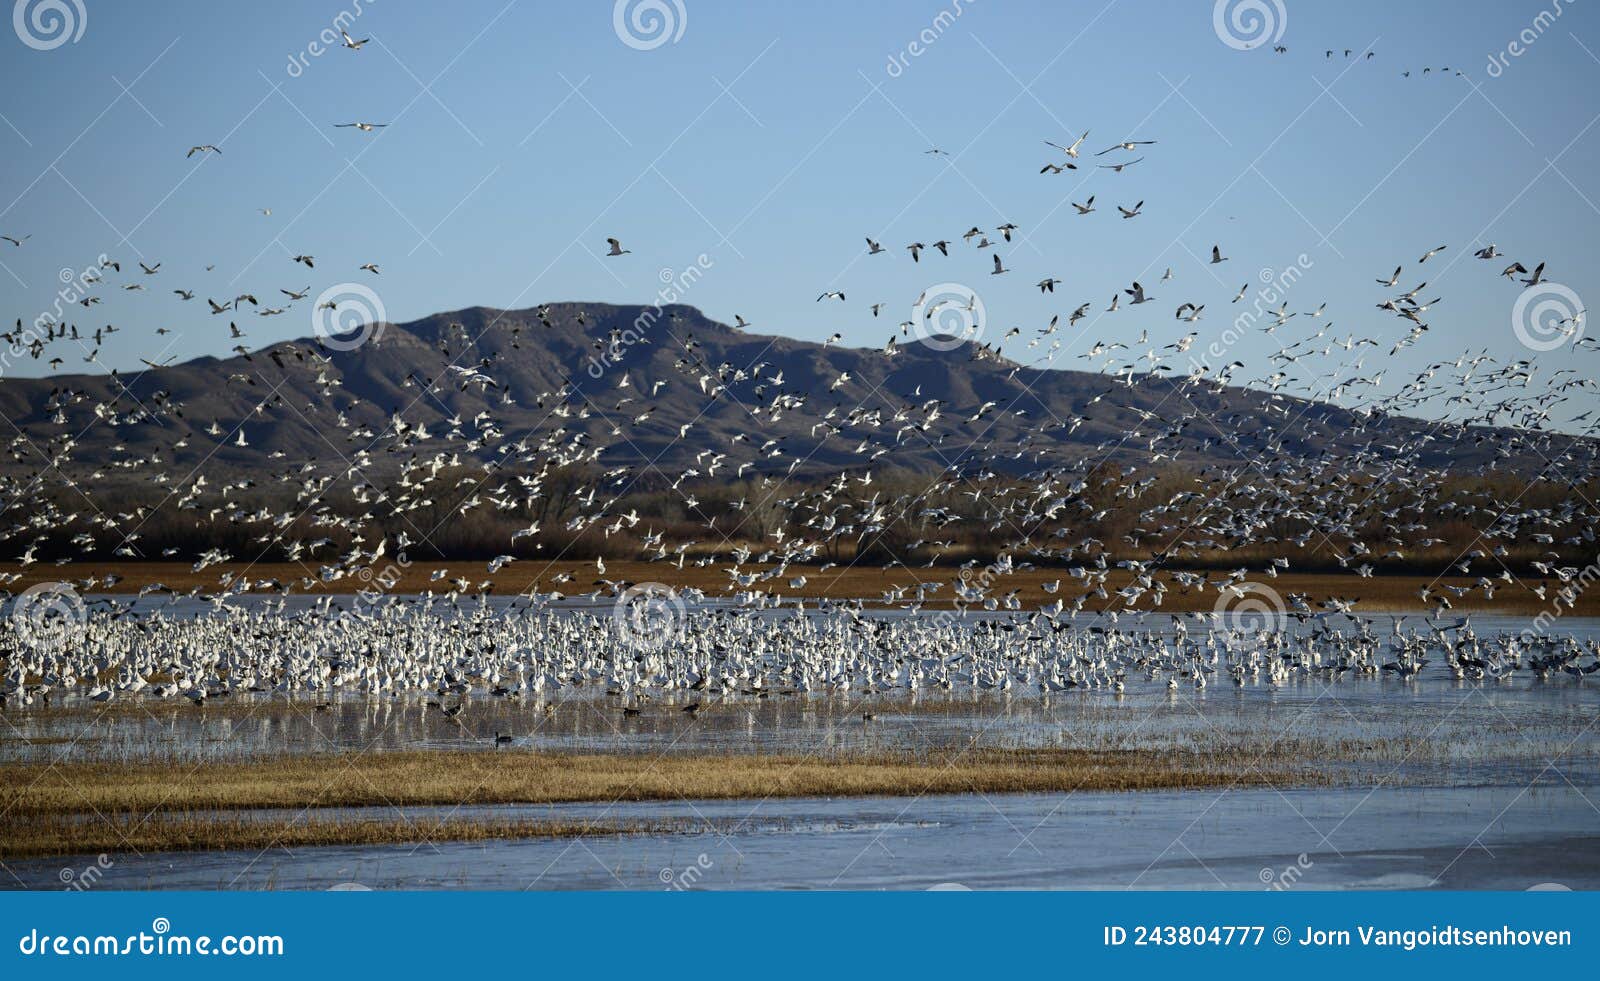 snow geese winter in the southwest